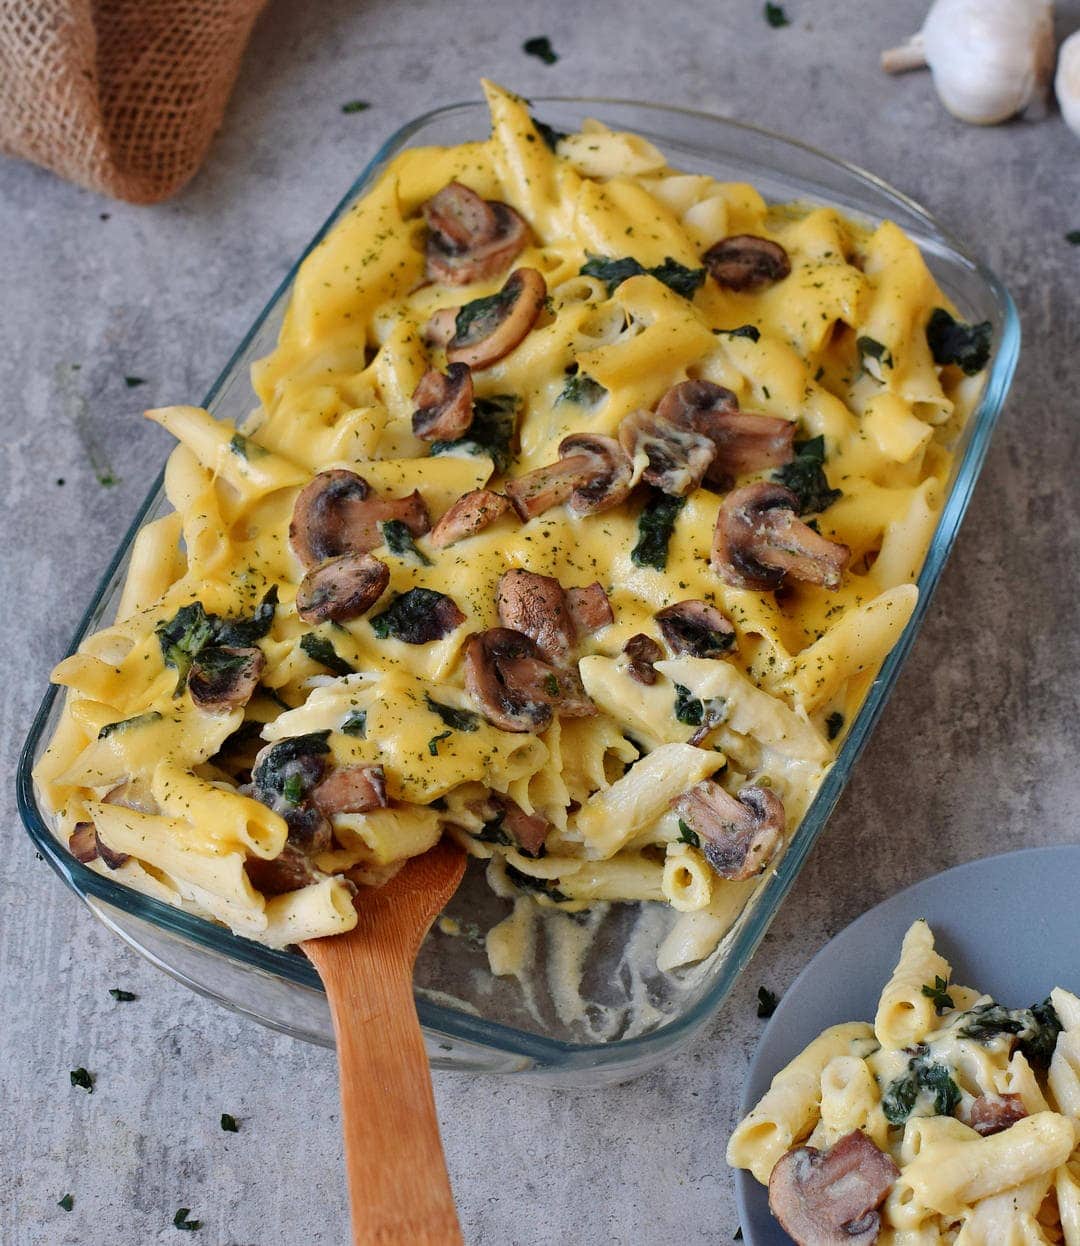 Cheesy casserole with mushrooms and spinach